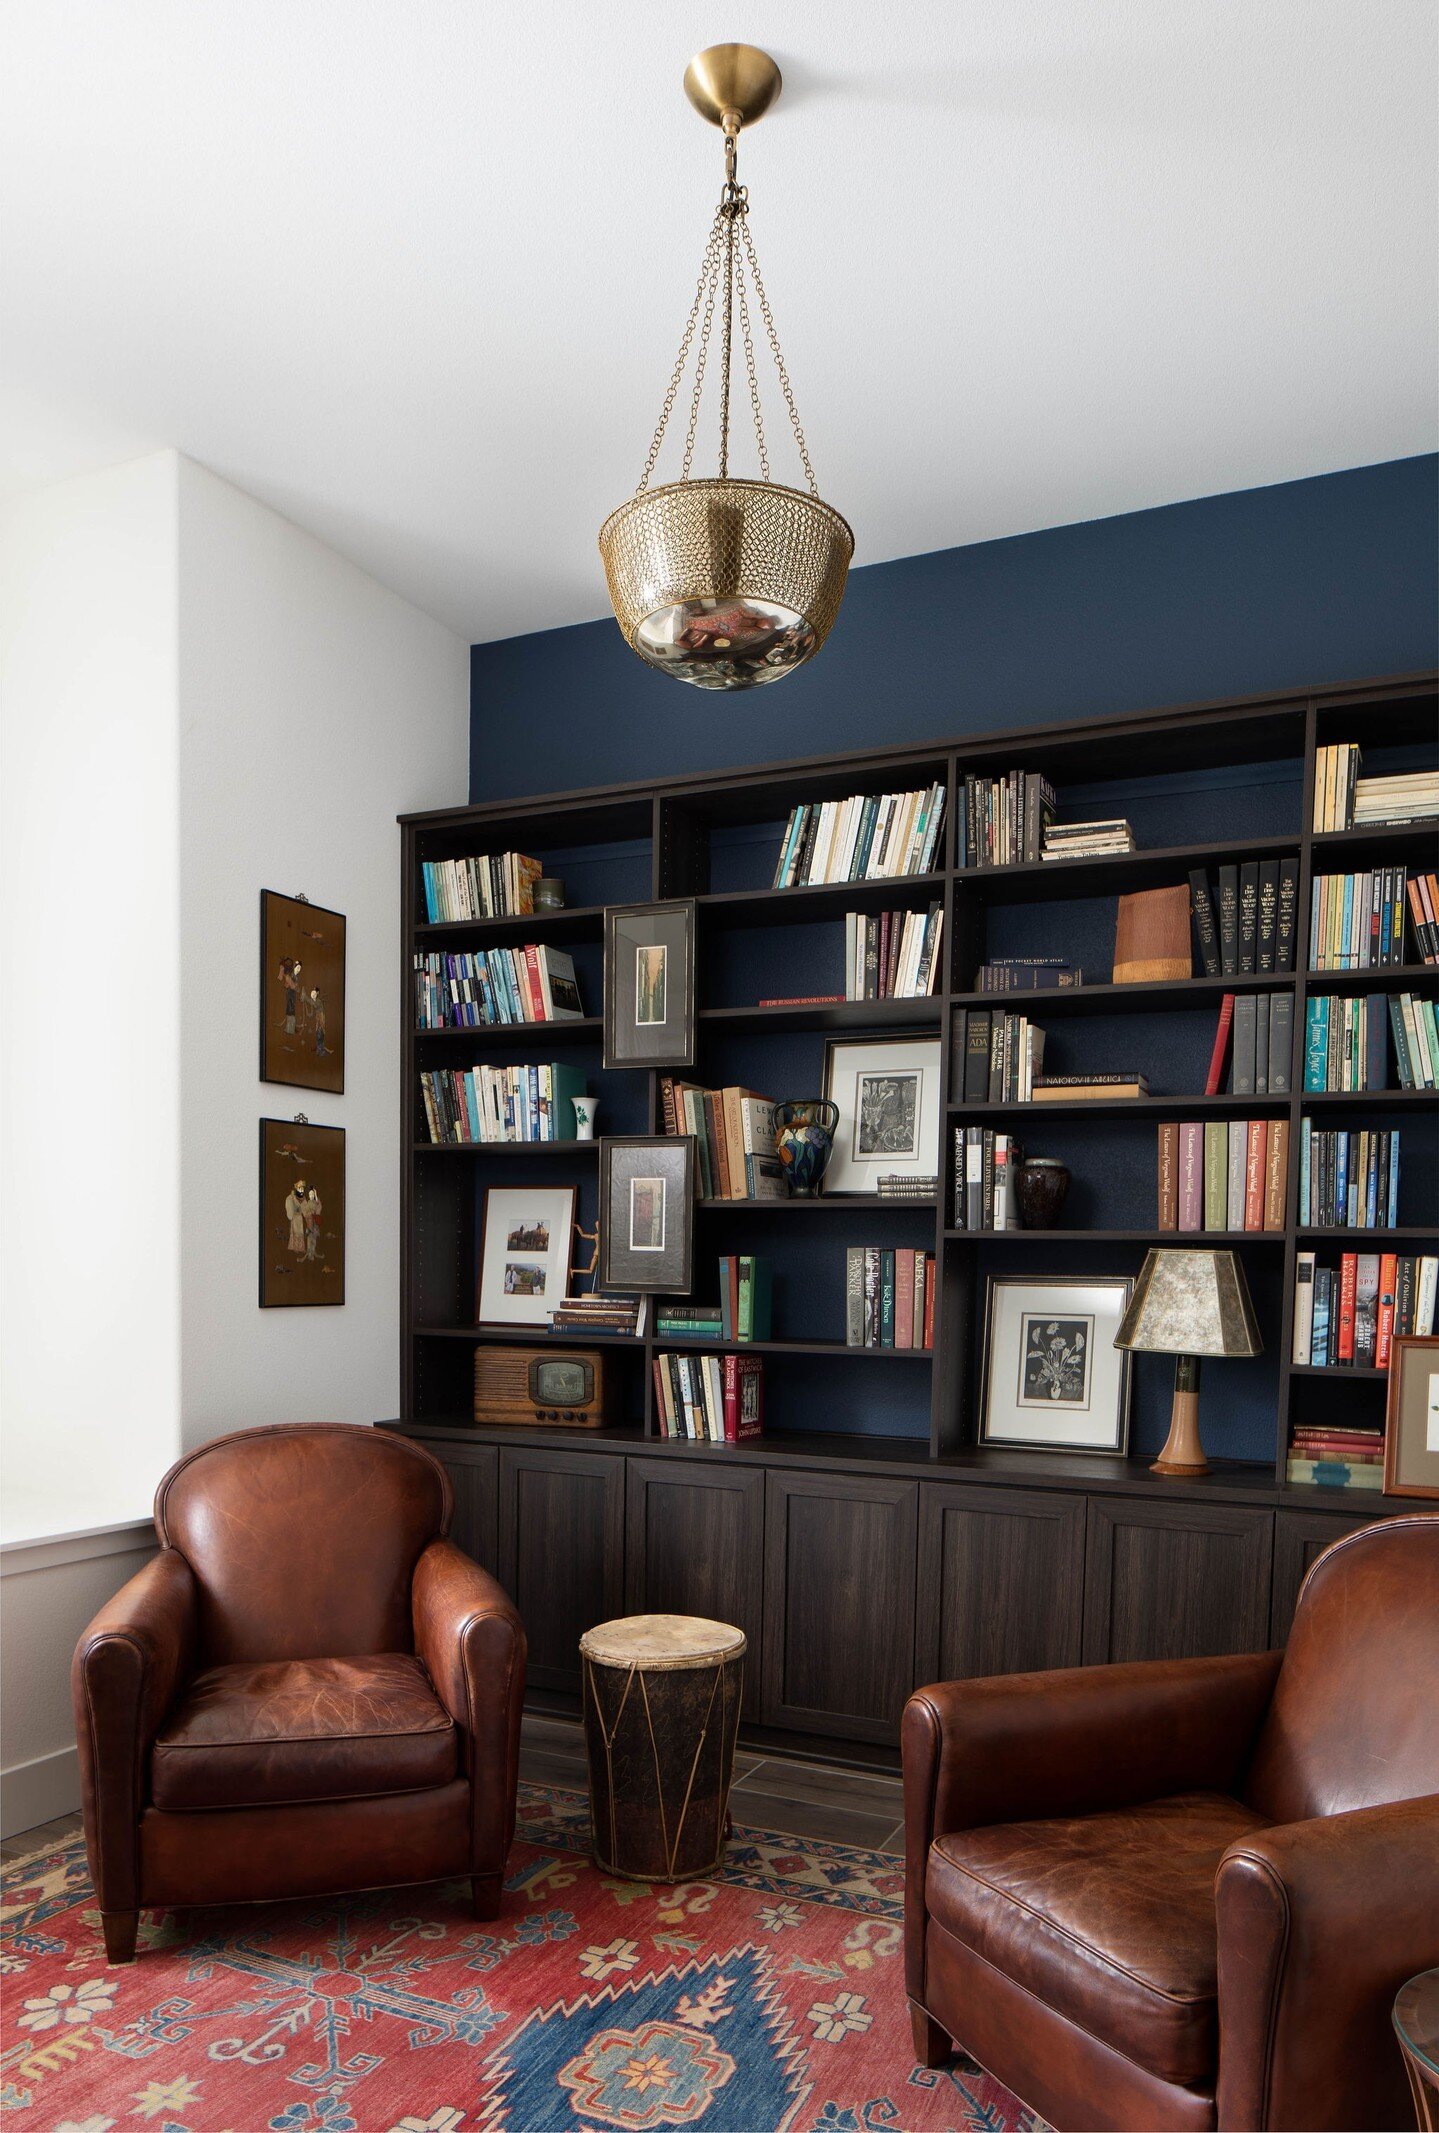 Sometimes great design is a blend of the existing with new elements. This reading room is just that. Our clients have great taste and we wanted to complement them in their style for a cohesive space. 

Designer: @kristenelizabethdesign
Photographer: 